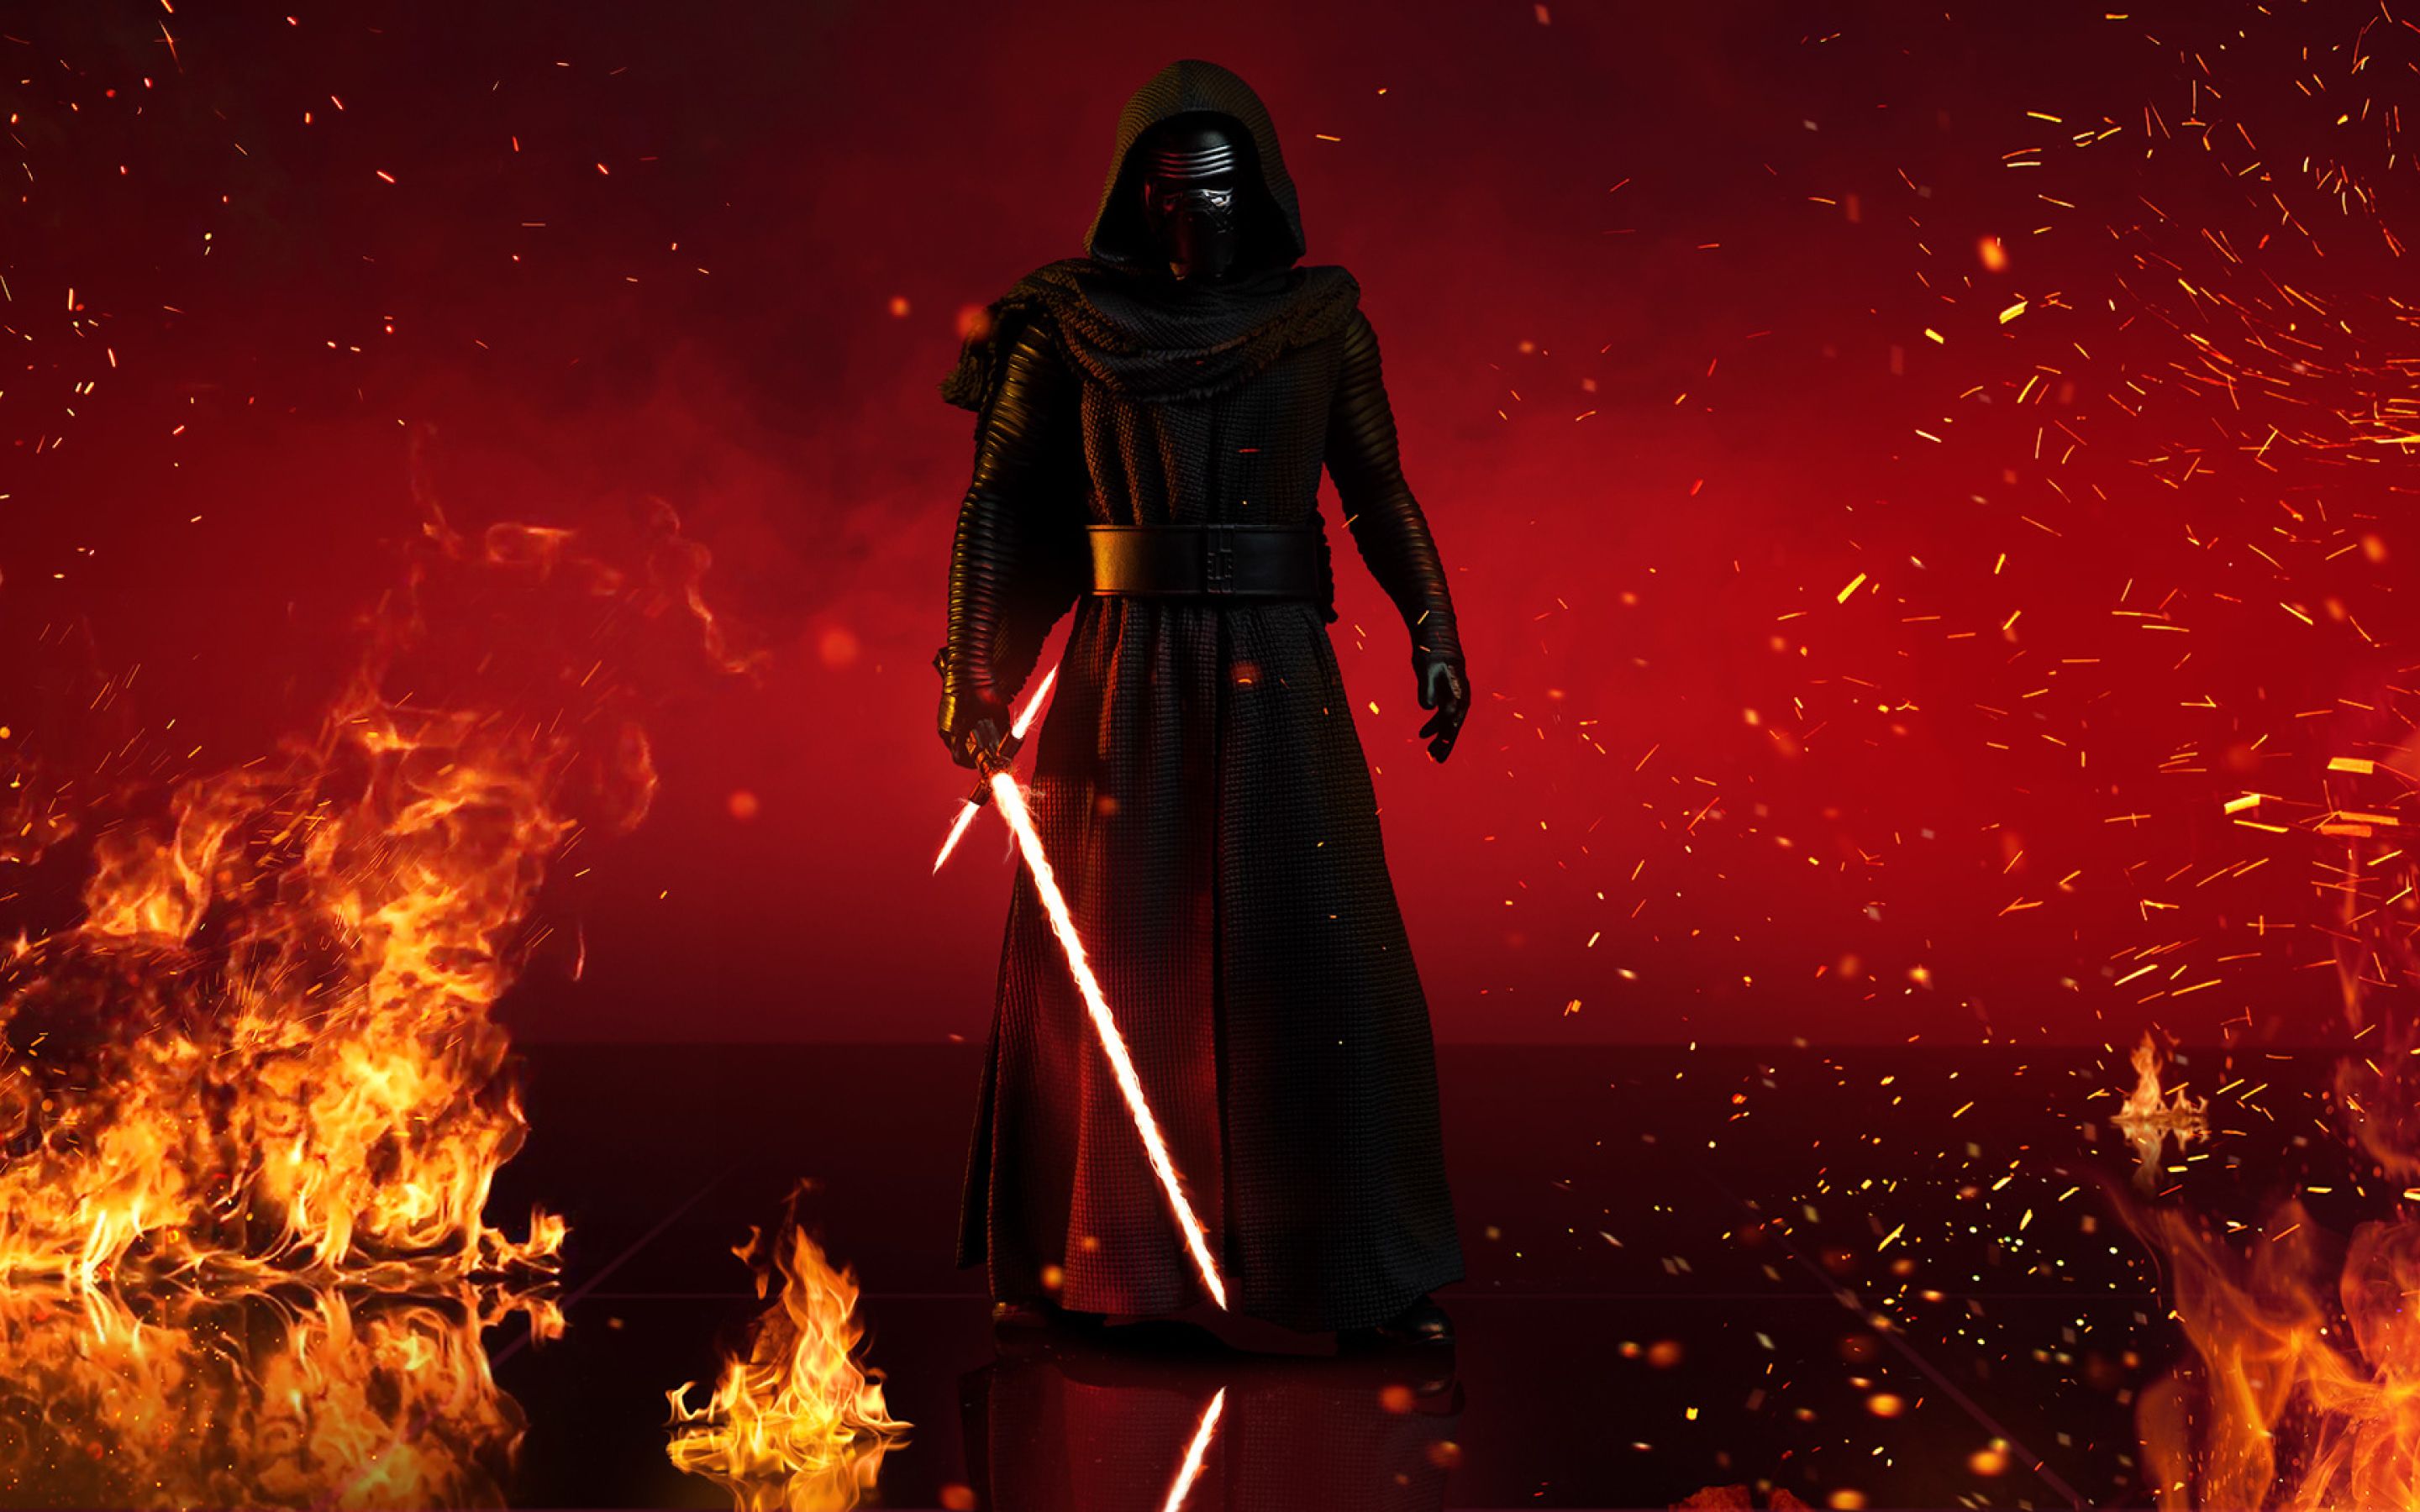 Kylo Ren With Lightsaber In Star Wars Macbook Pro Retina Wallpaper, HD Movies 4K Wallpaper, Image, Photo and Background